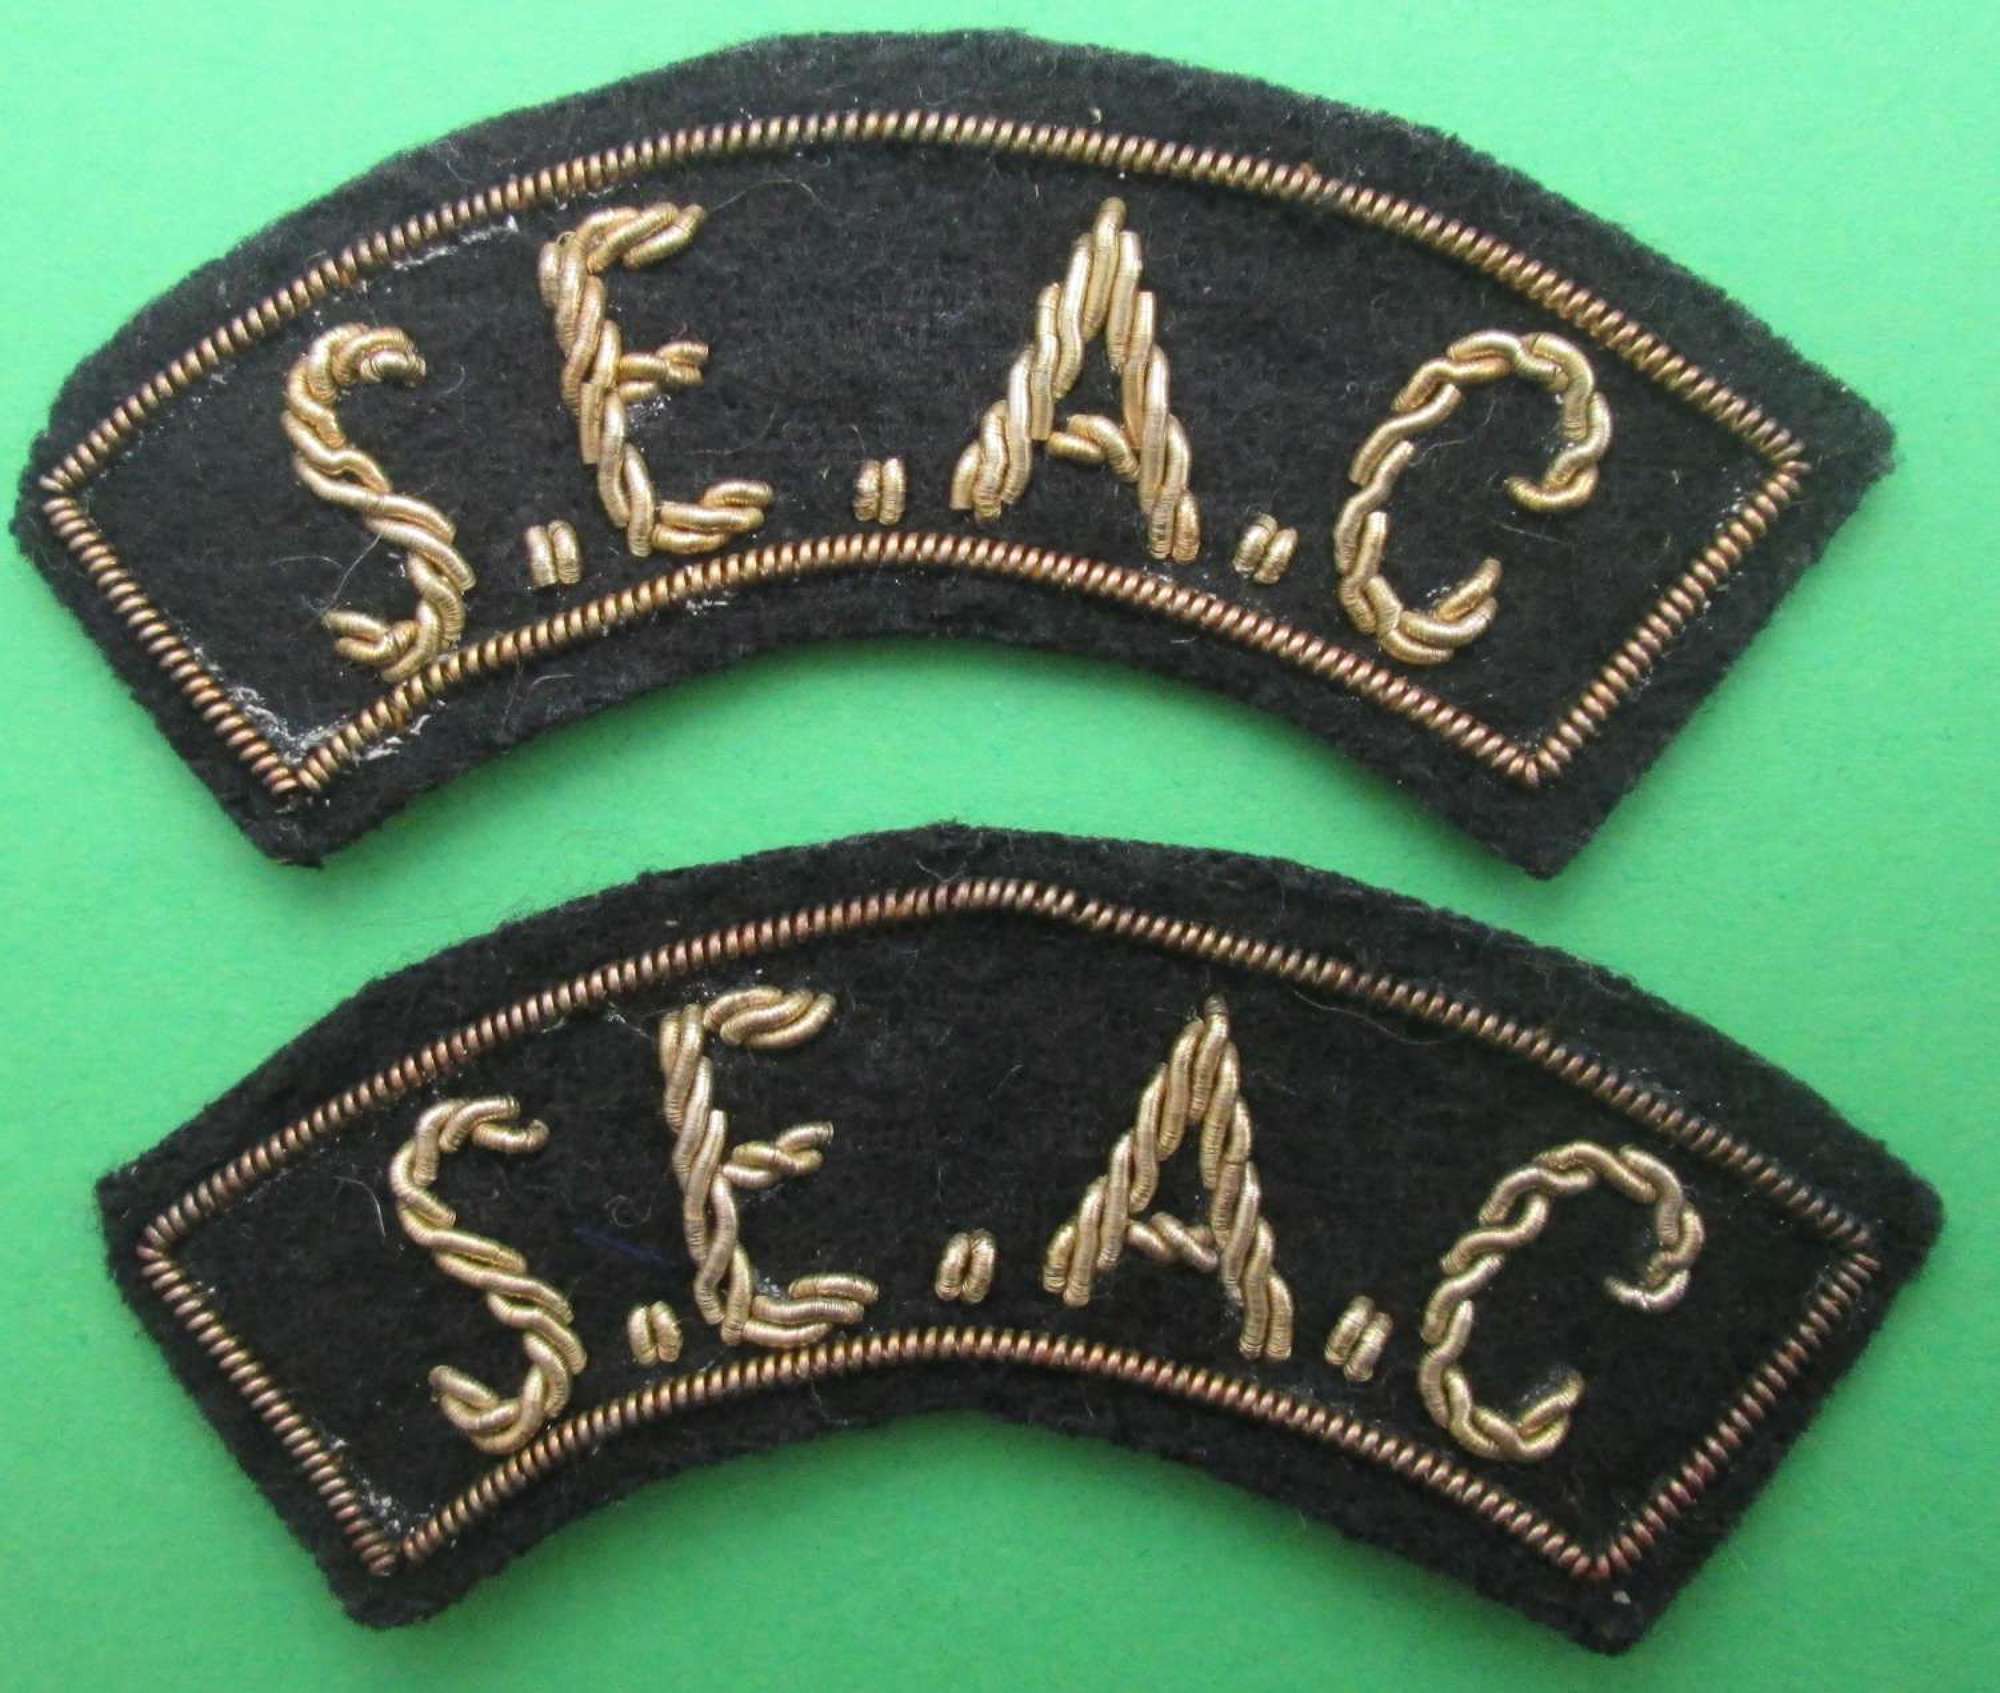 A PAIR OF SOUTH EAST ASIA COMMAND SHOULDER TITLES